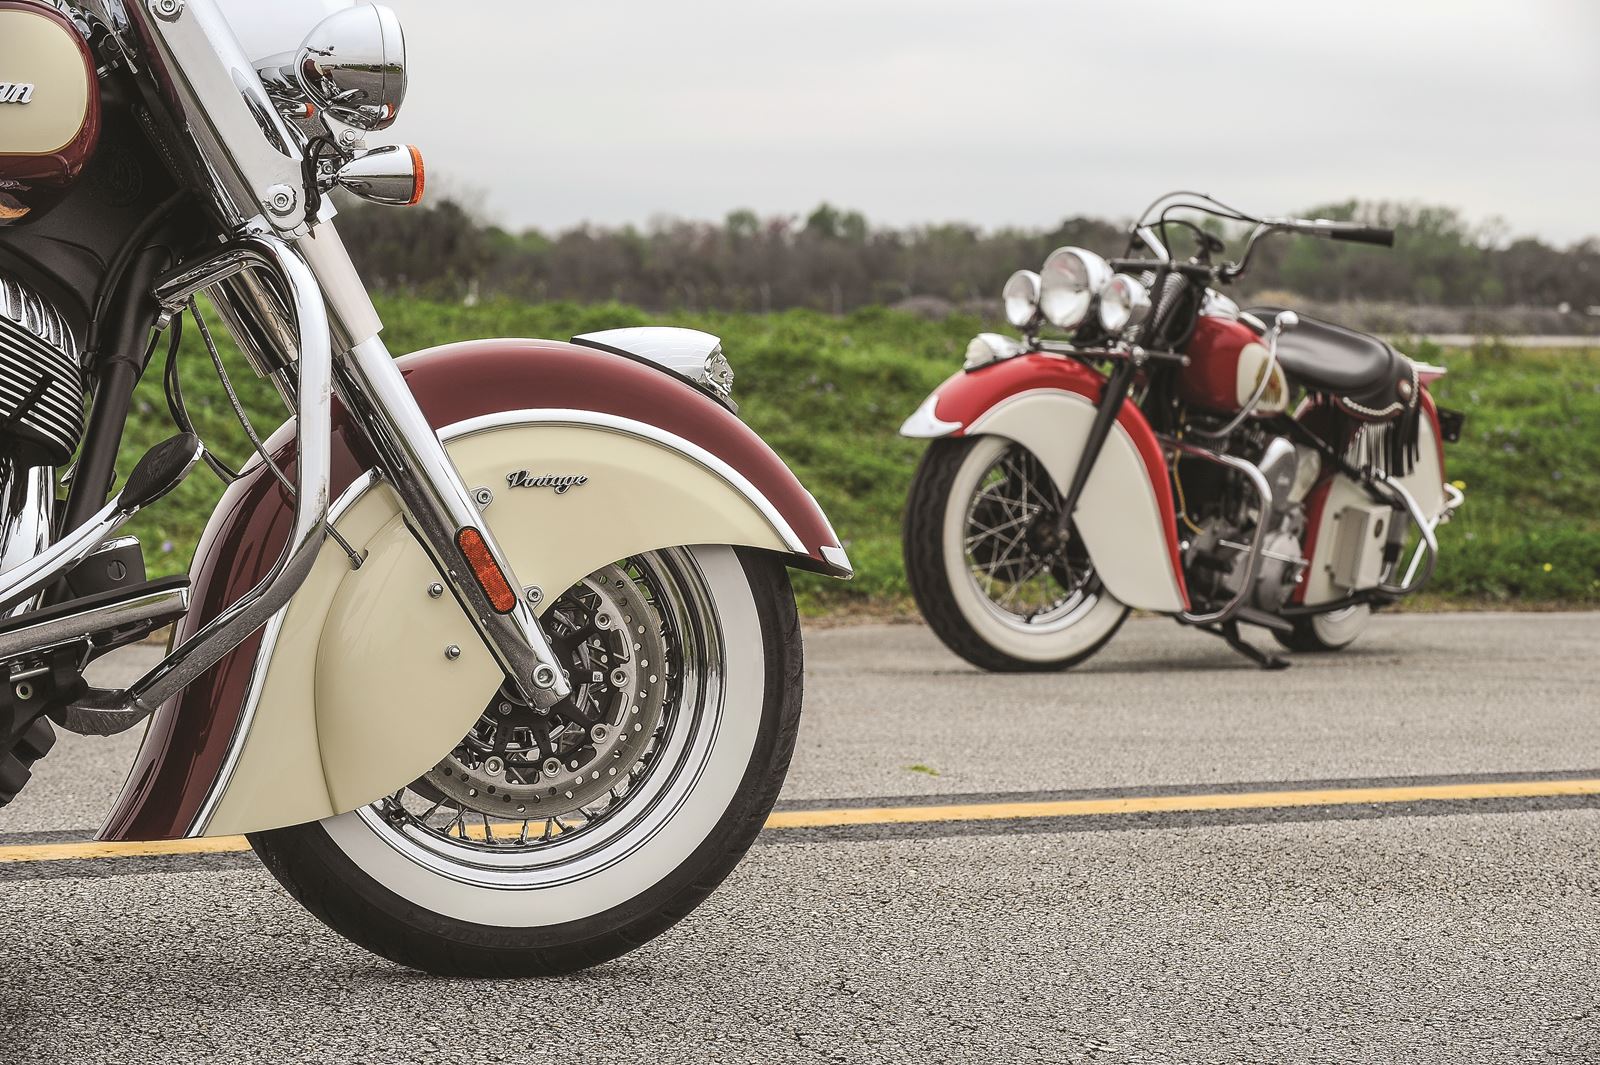 Indian Chief y Chieftain